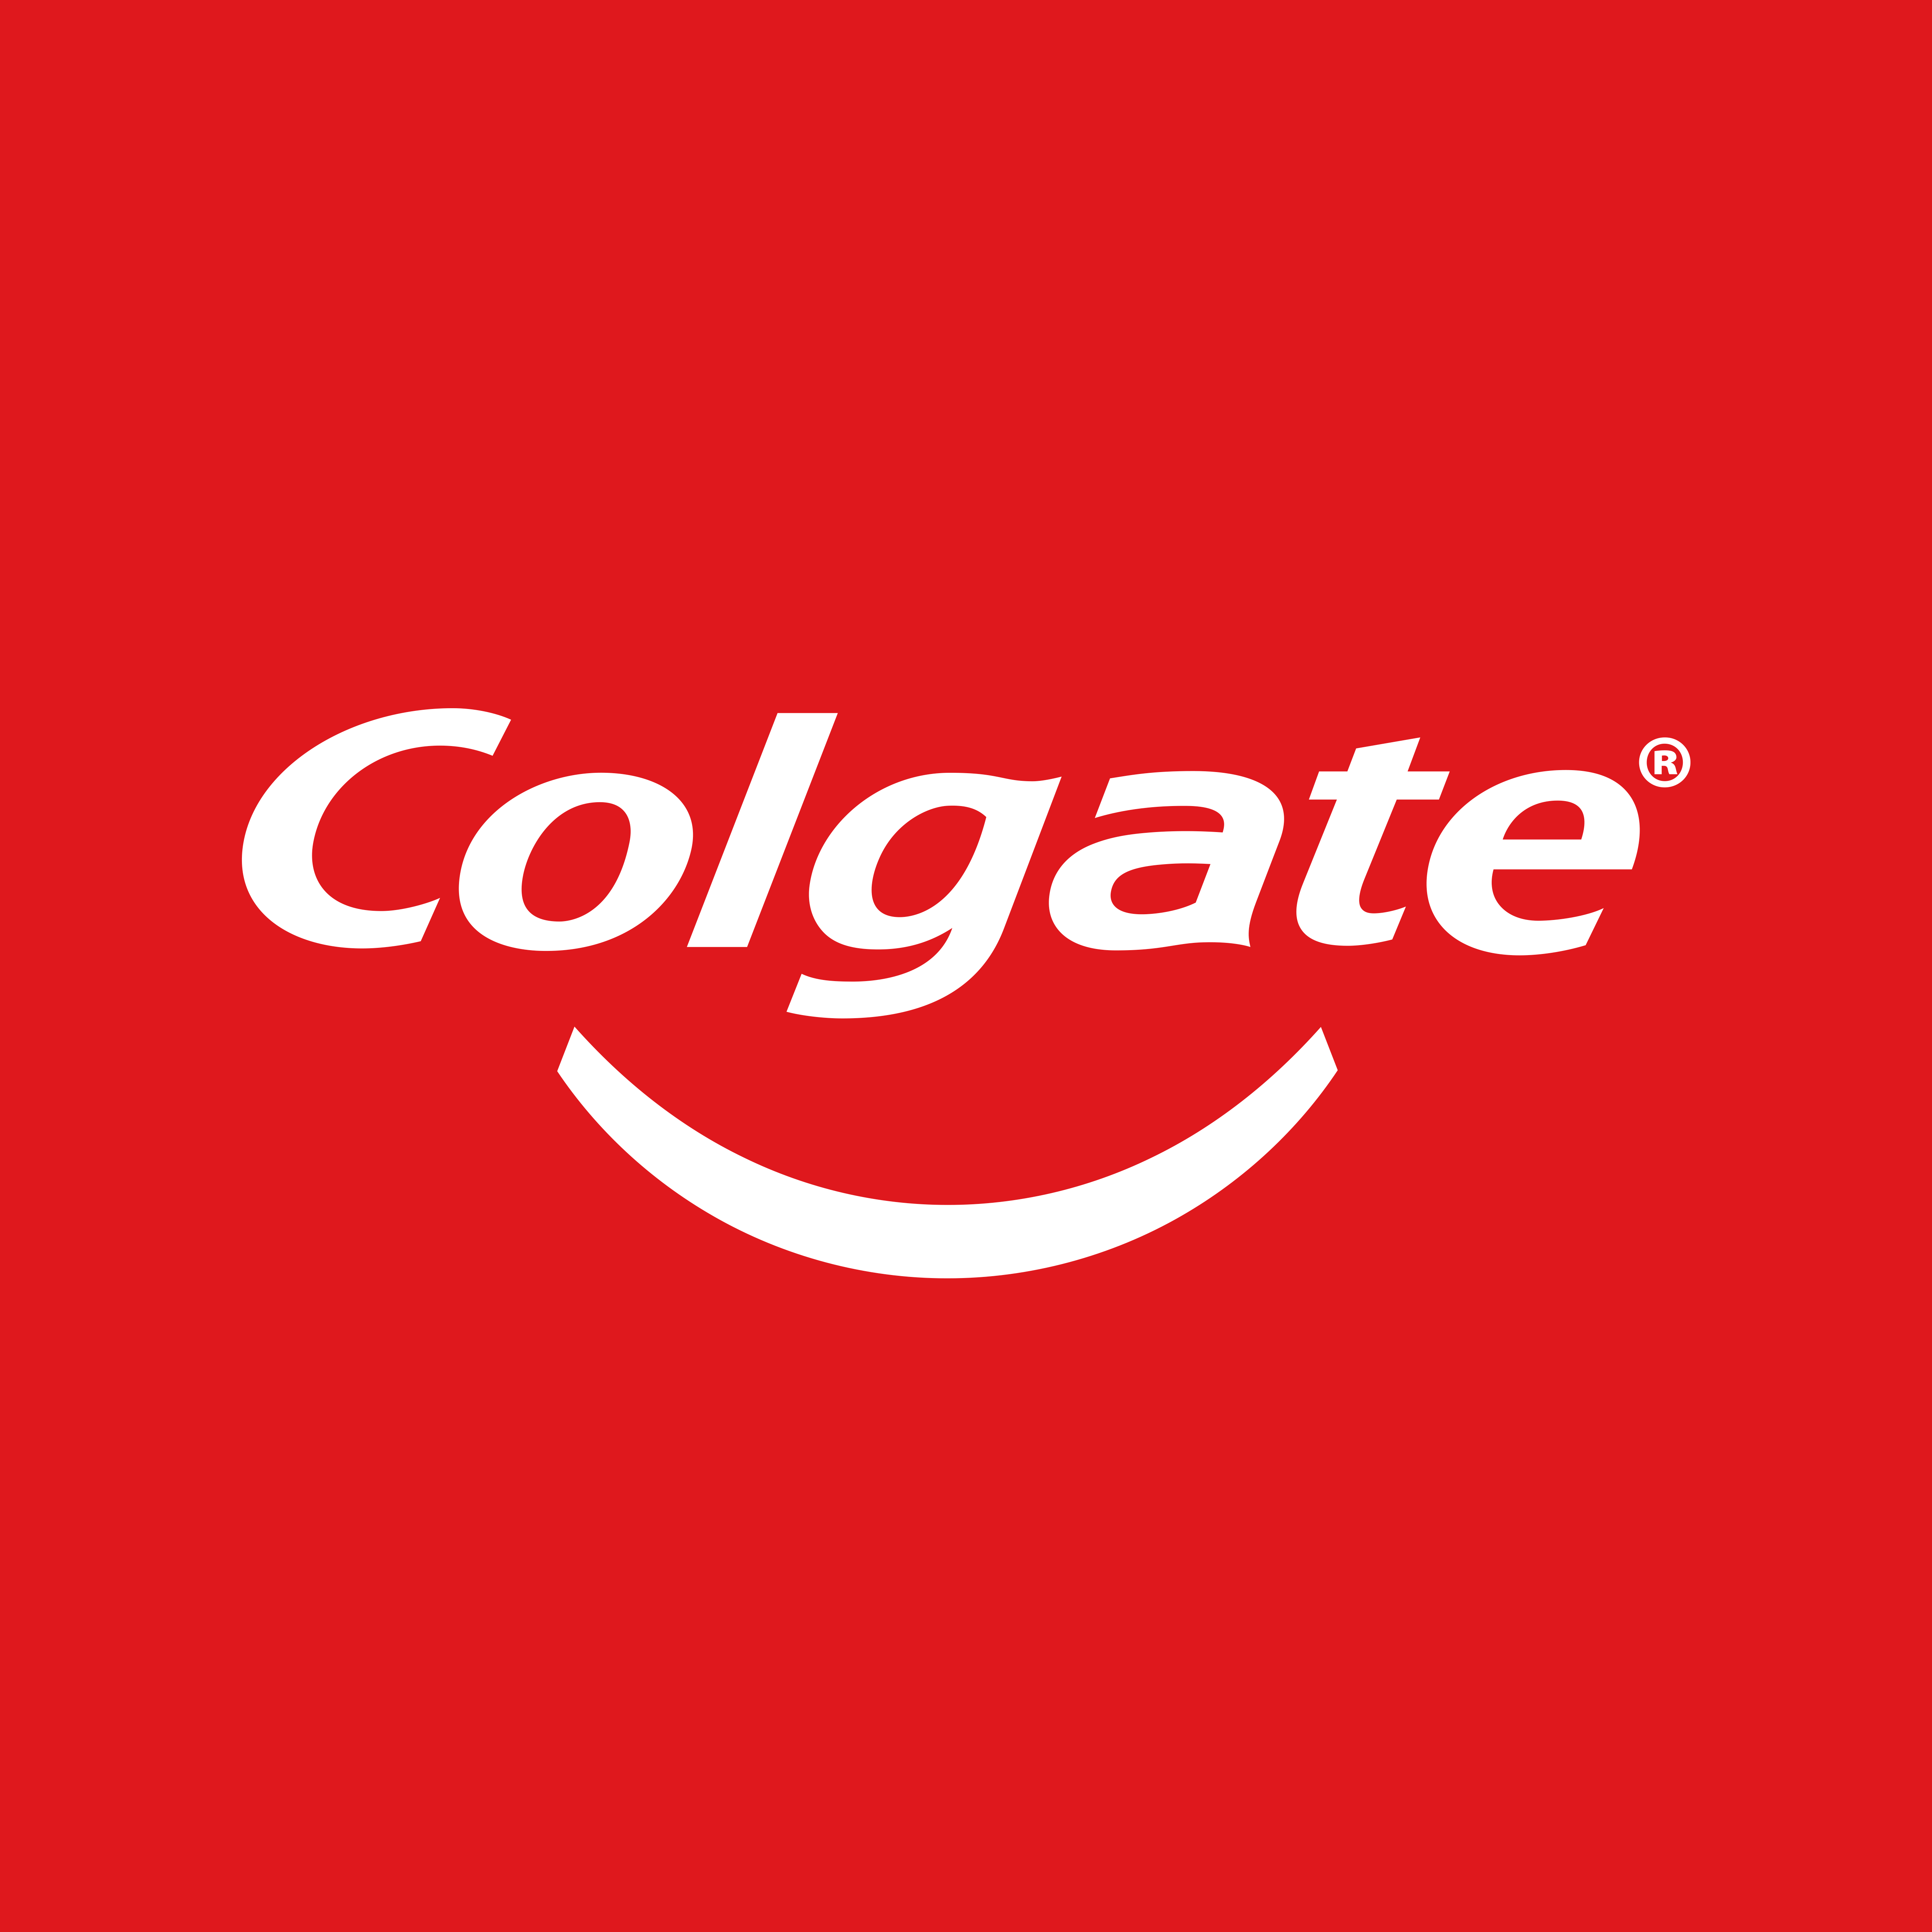 Image for Colgate Laboratory Tests Show Toothpaste And Mouthwash Neutralize 99.9% Of The Virus That Causes COVID-19